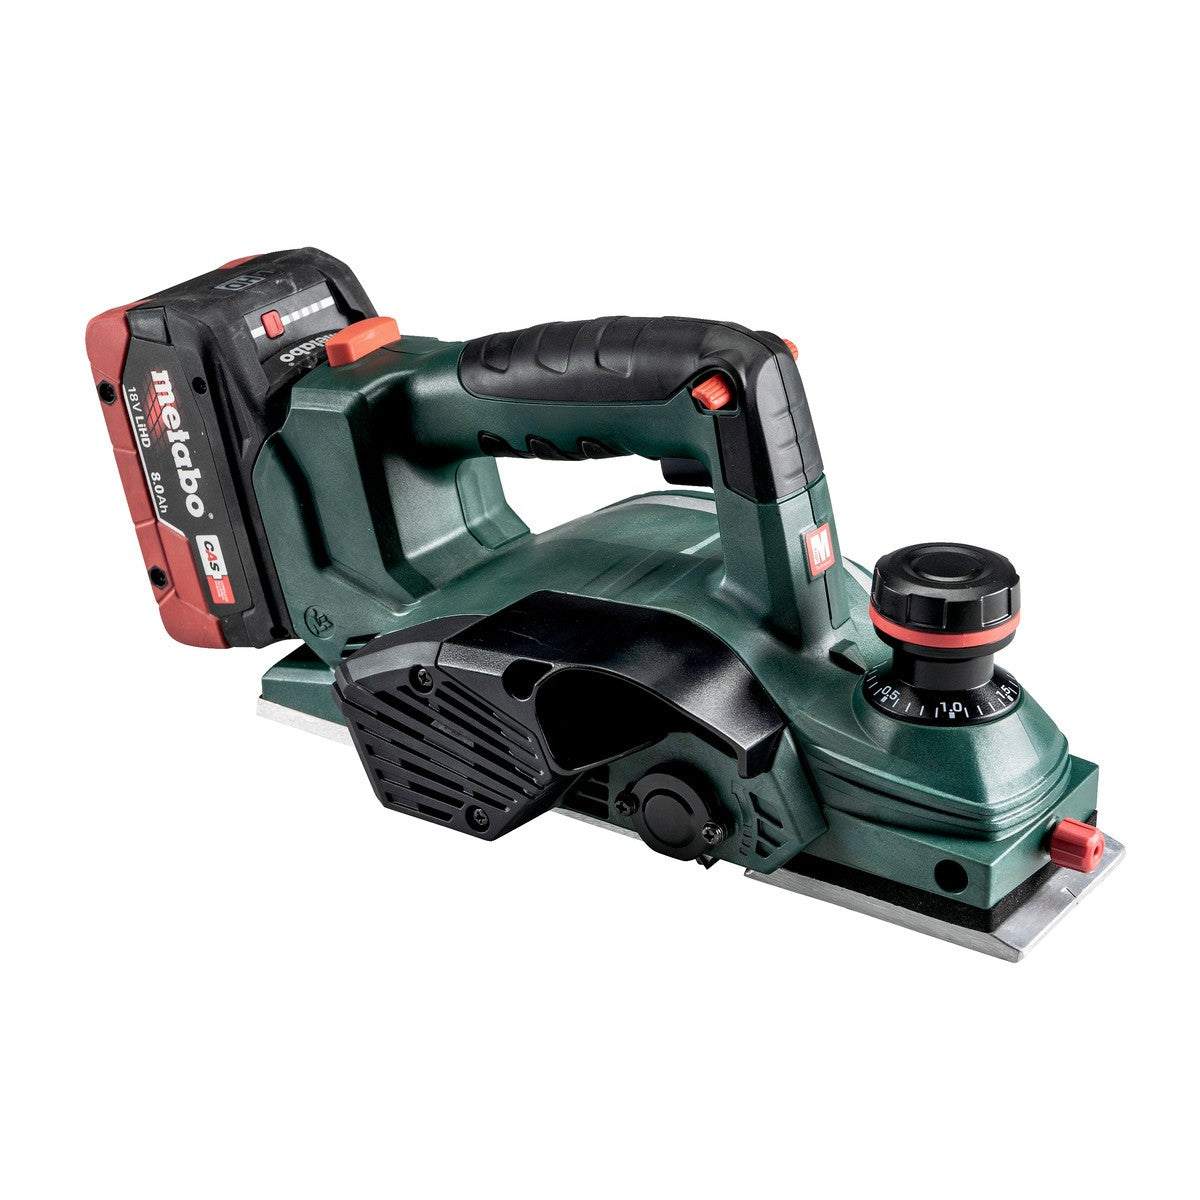 Metabo 18V Compact Reciprocating Saw Bare (602266890 18 LTX COMPACT Bare), Woodworking - 4